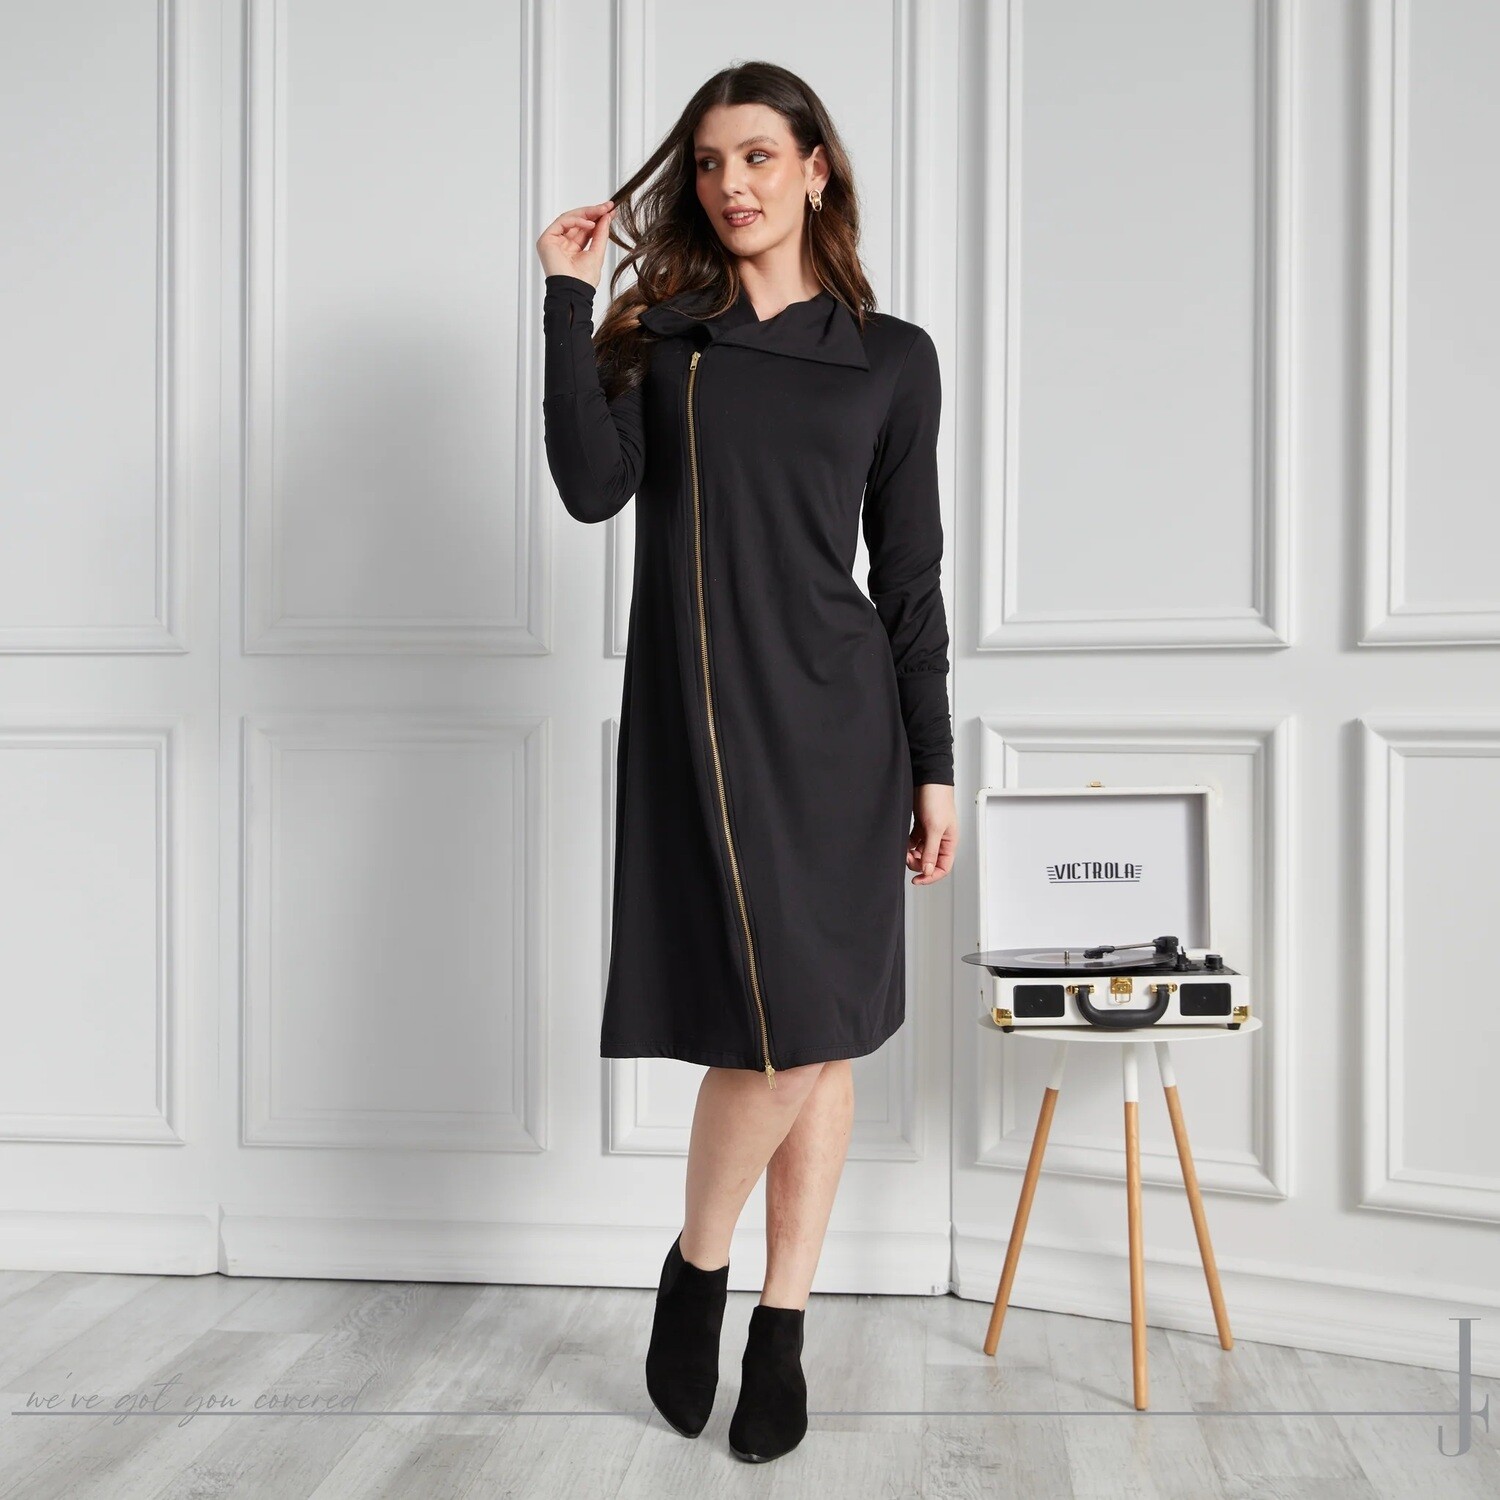 Zip front dress - perfect for EVERY day, Size: M